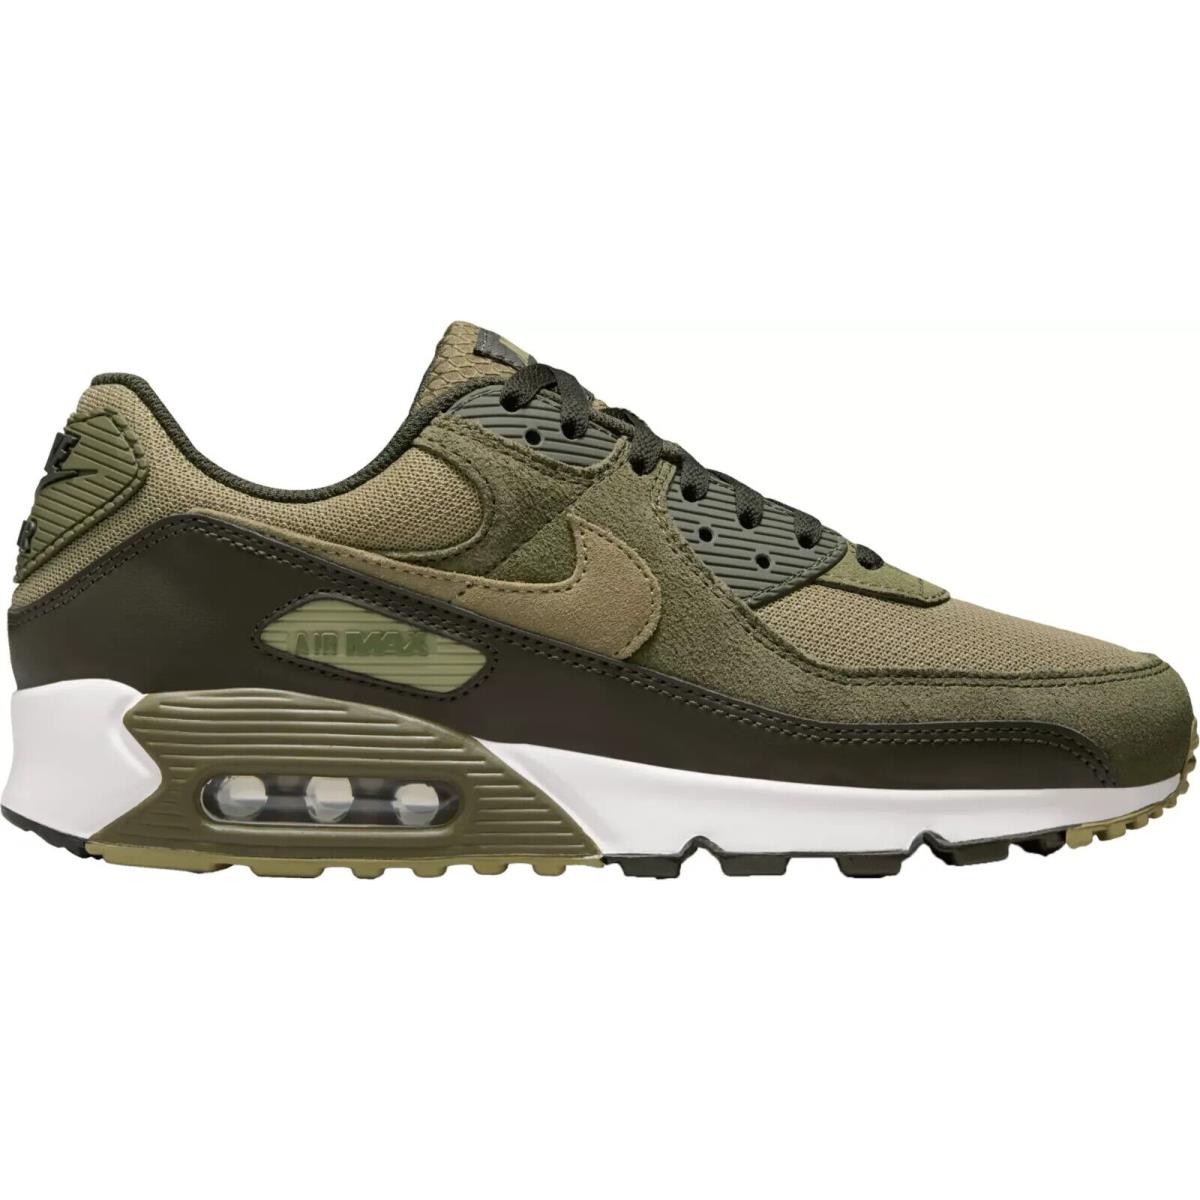 Nike Air Max 90 Men`s Casual Shoes All Colors US Sizes 7-14 Bestseller Neutral Olive/Neutral Olive/Medium Olive